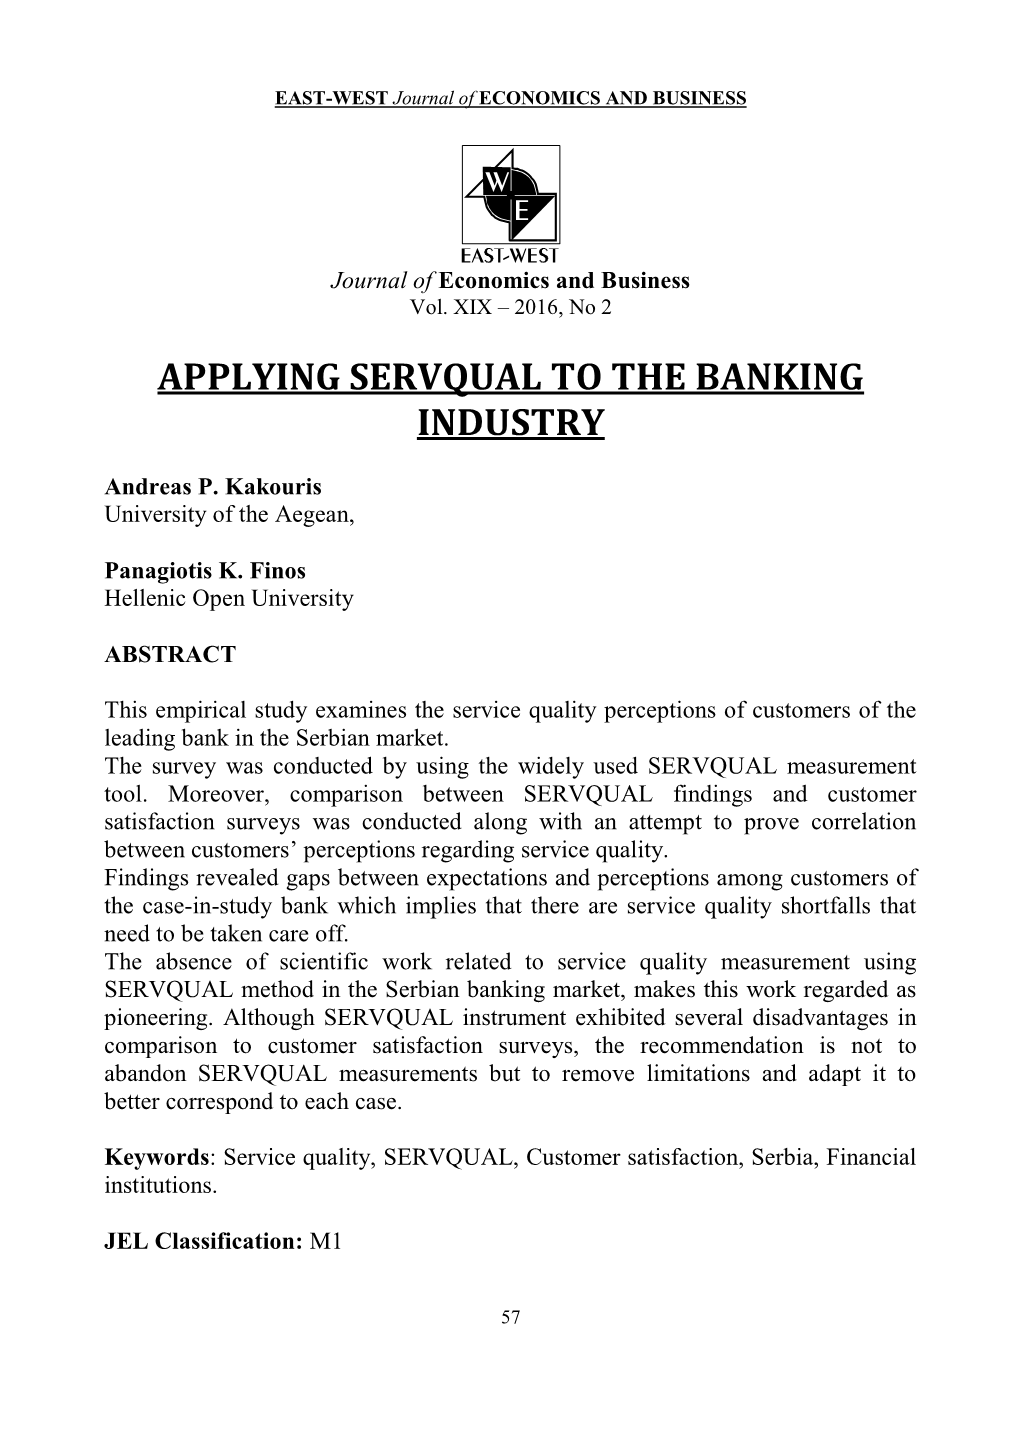 Applying Servqual to the Banking Industry